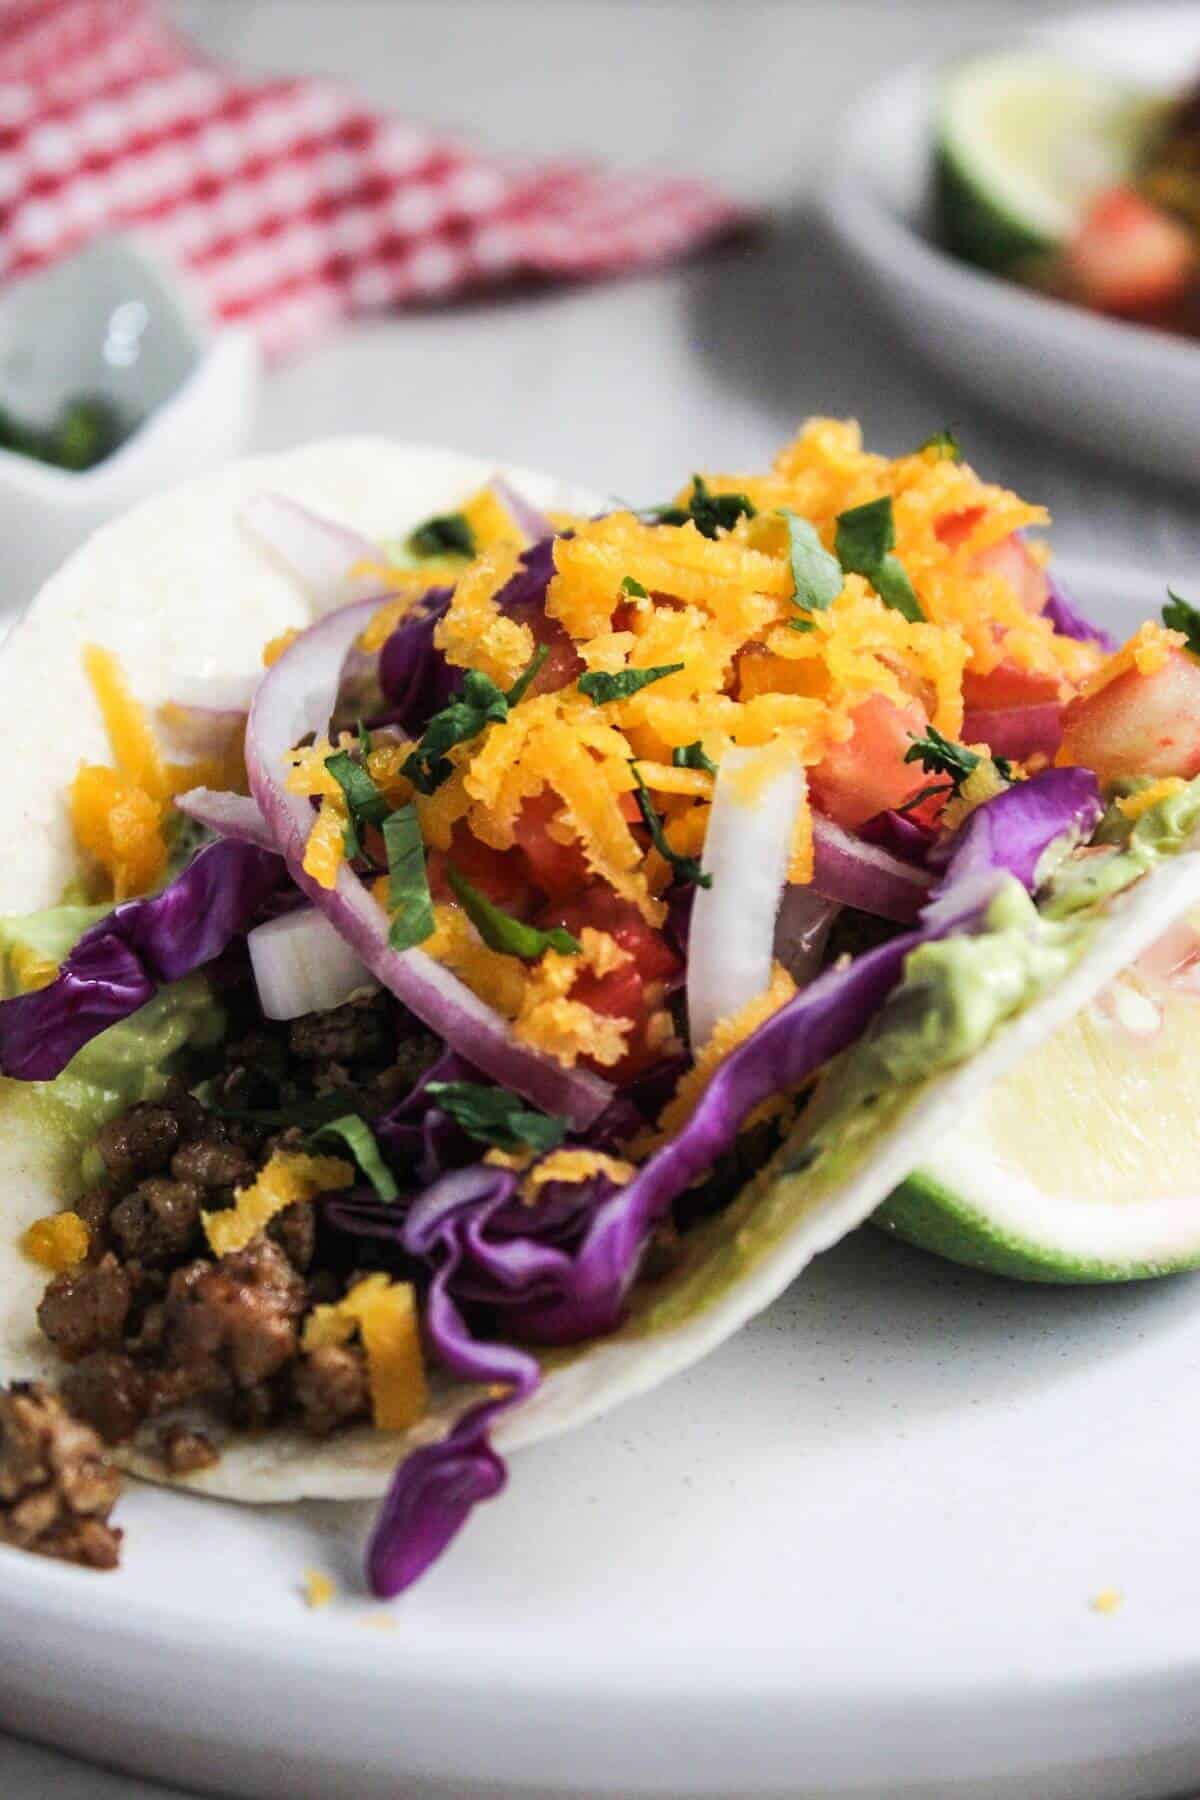 A plate of ground pork tacos on a white plate.